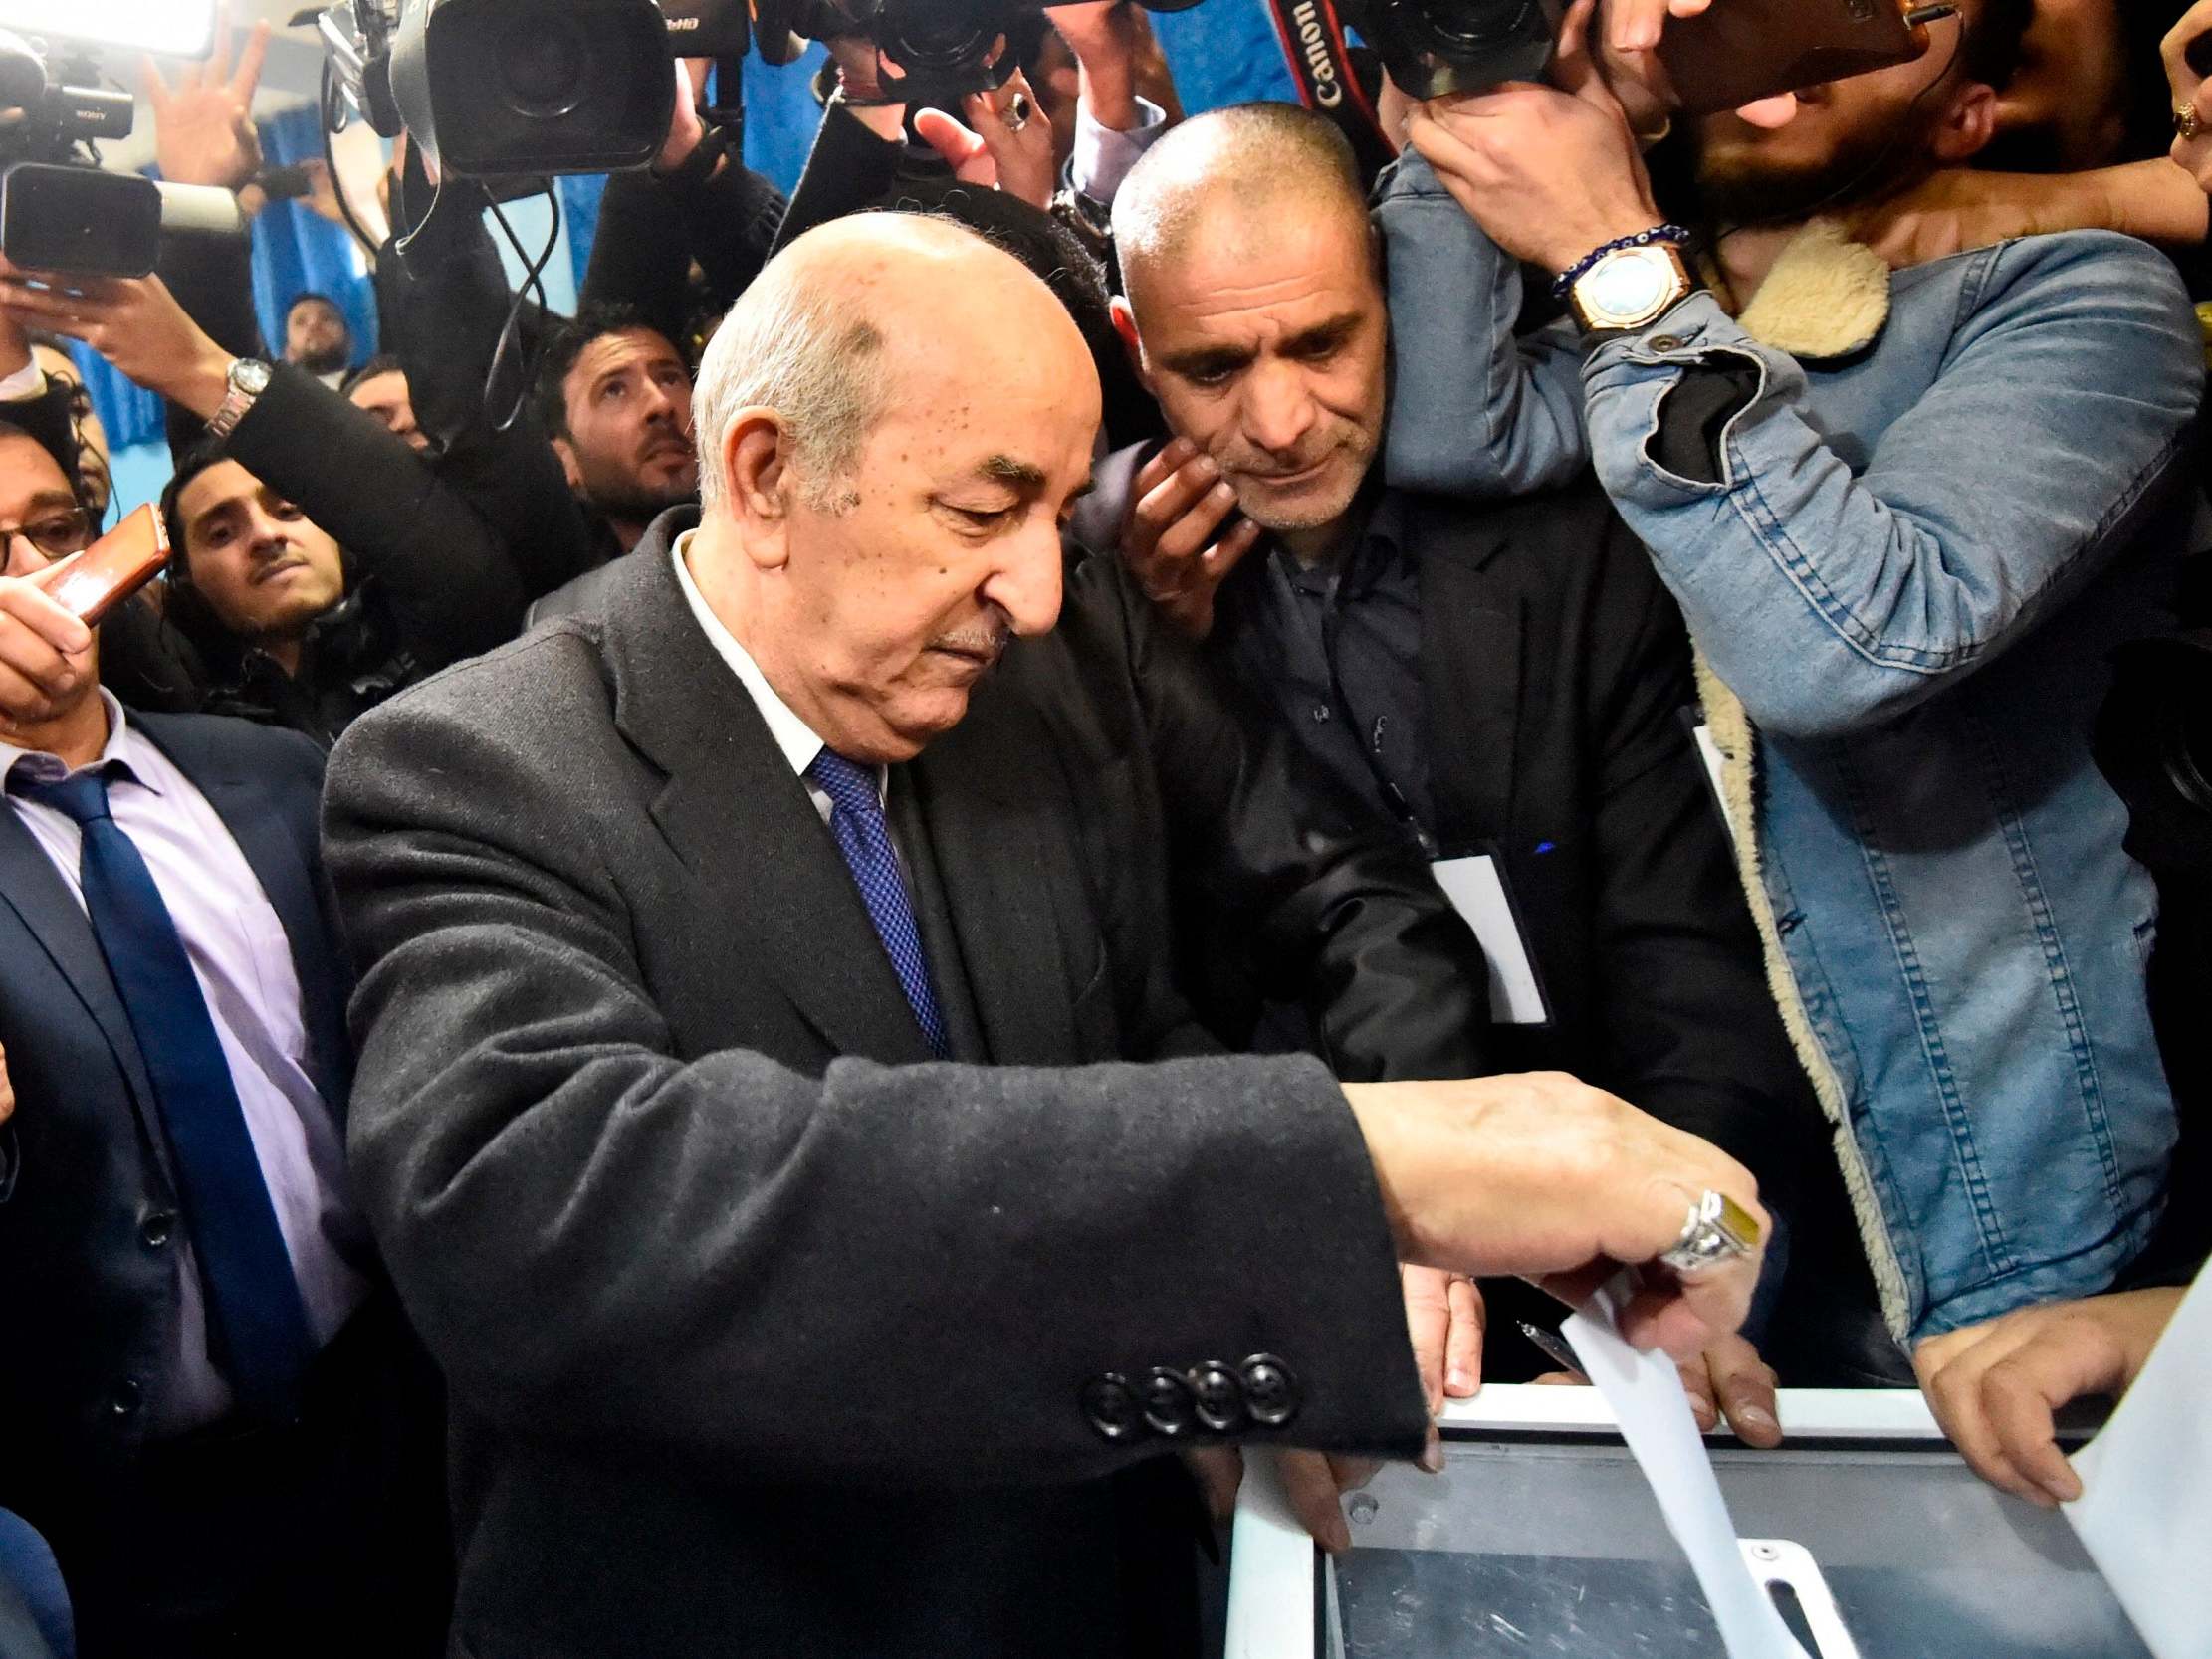 Algerian candidate Abdelmadjid Tebboune casts his vote during the election (AFP/Getty)